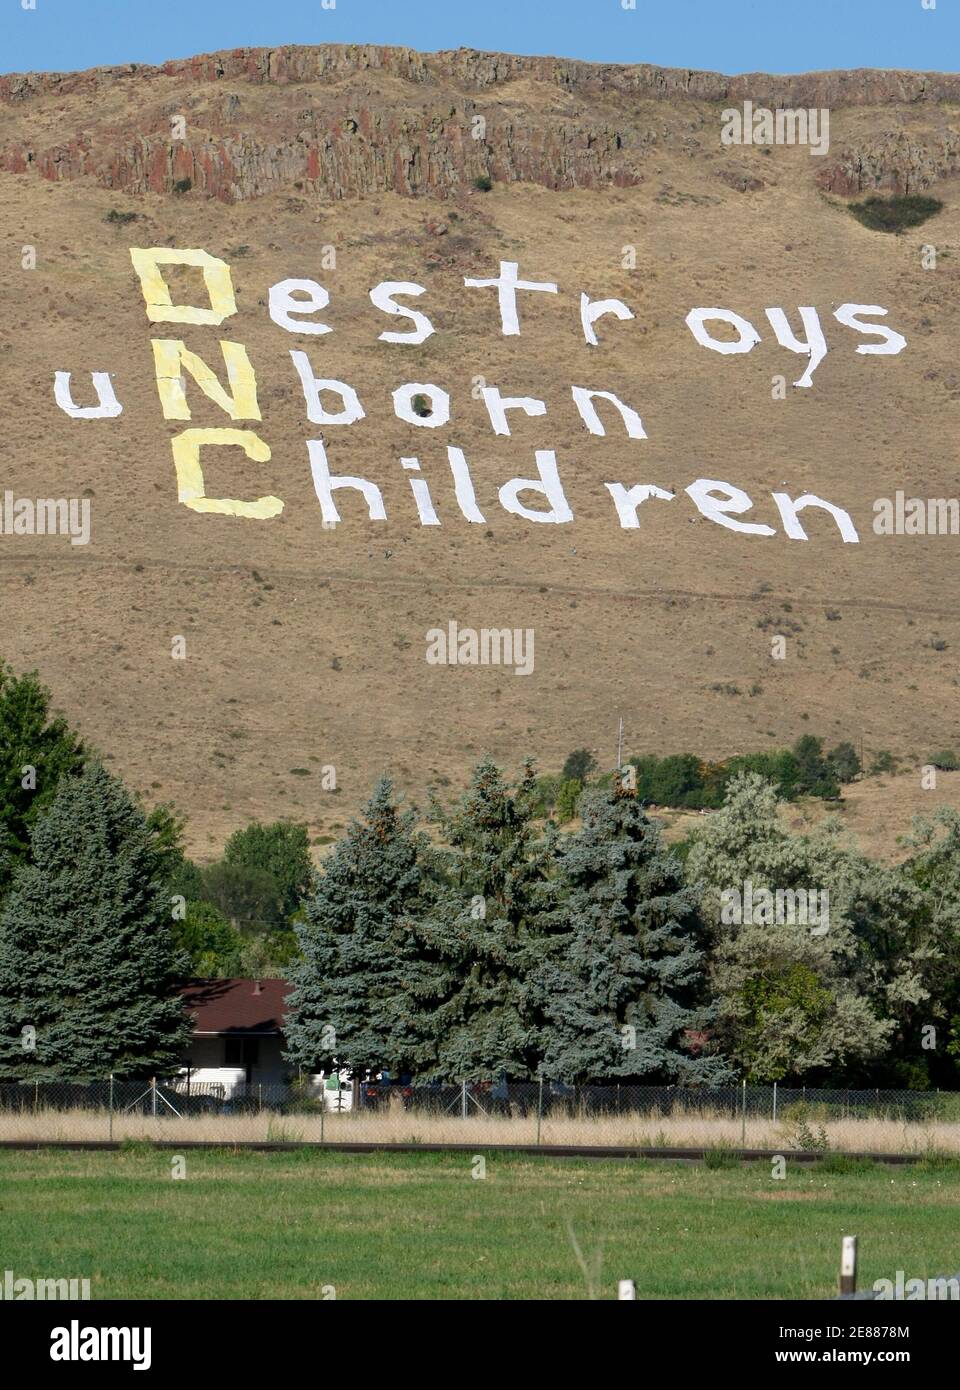 Anti-abortion demonstrators unfurl a giant sign on the side of North Table Mountain in Golden, Colorado August 26, 2008 referring to the 2008 Democratic National Convention in Denver, Colorado. U.S. Senator Barack Obama (D-IL) is expected to accept the Democratic presidential nomination at the convention on August 28.  REUTERS/Rick Wilking    (UNITED STATES)   US PRESIDENTIAL ELECTION CAMPAIGN 2008  (USA) Stock Photo